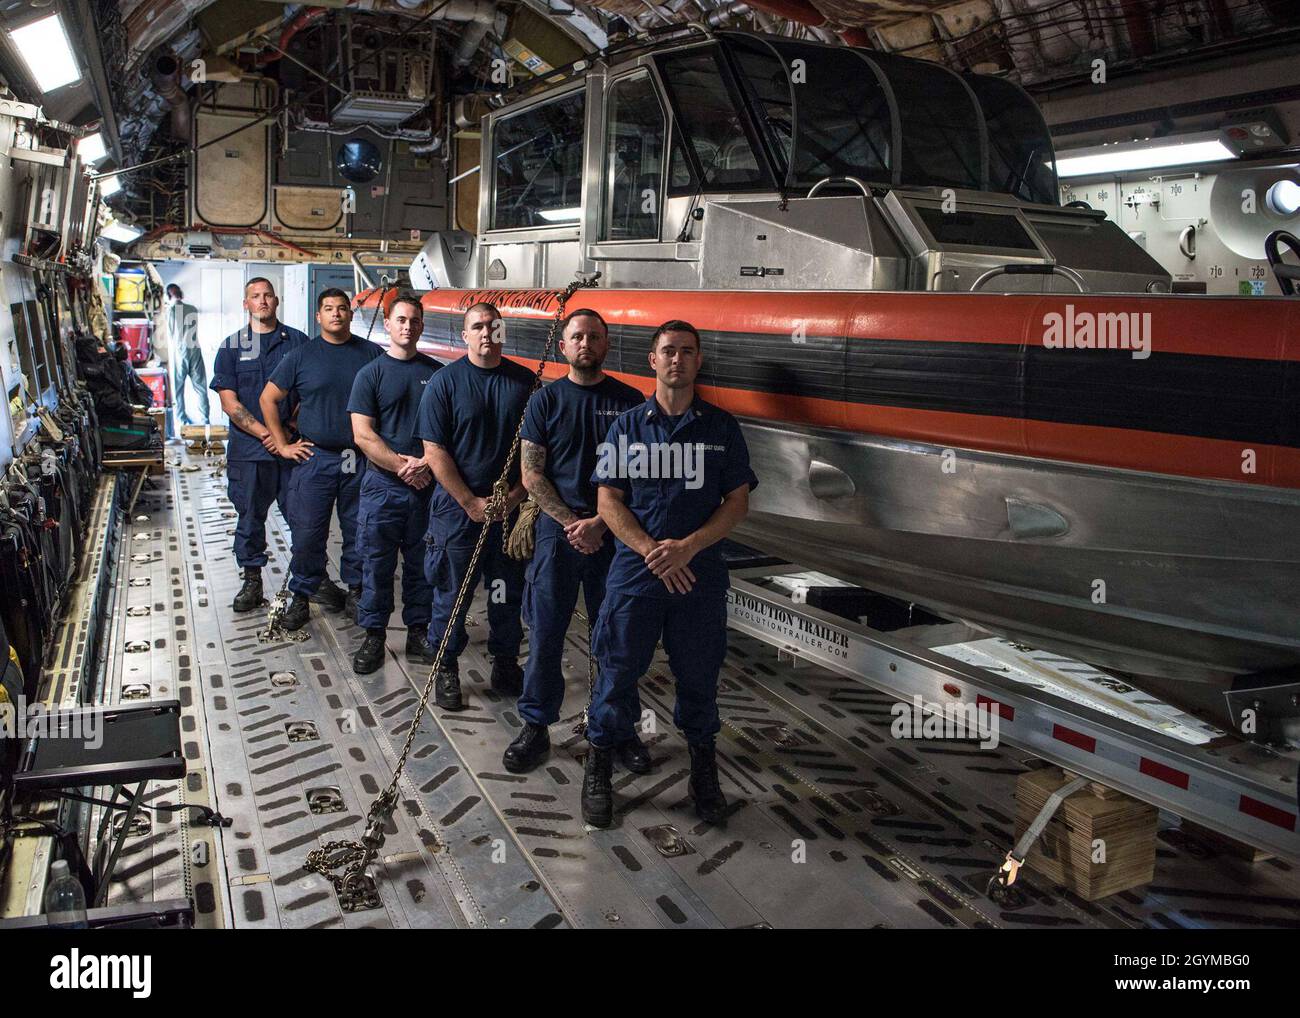 Joint Maritime Safety and Security Teams from the Coast Guard stand next to a USCG vessel they have uploaded to a C-17 Globemaster III aircraft during exercise Patriot Palm, Jan. 30, 2020, at Kalaeloa Airport, Hawaii. A joint-team of several military branches participated with the 315th Contingency Response Flight from Joint Base Charleston in support of exercise Patriot Palm. (U.S. Air Force photo by Tech. Sgt. Della Creech) Stock Photo